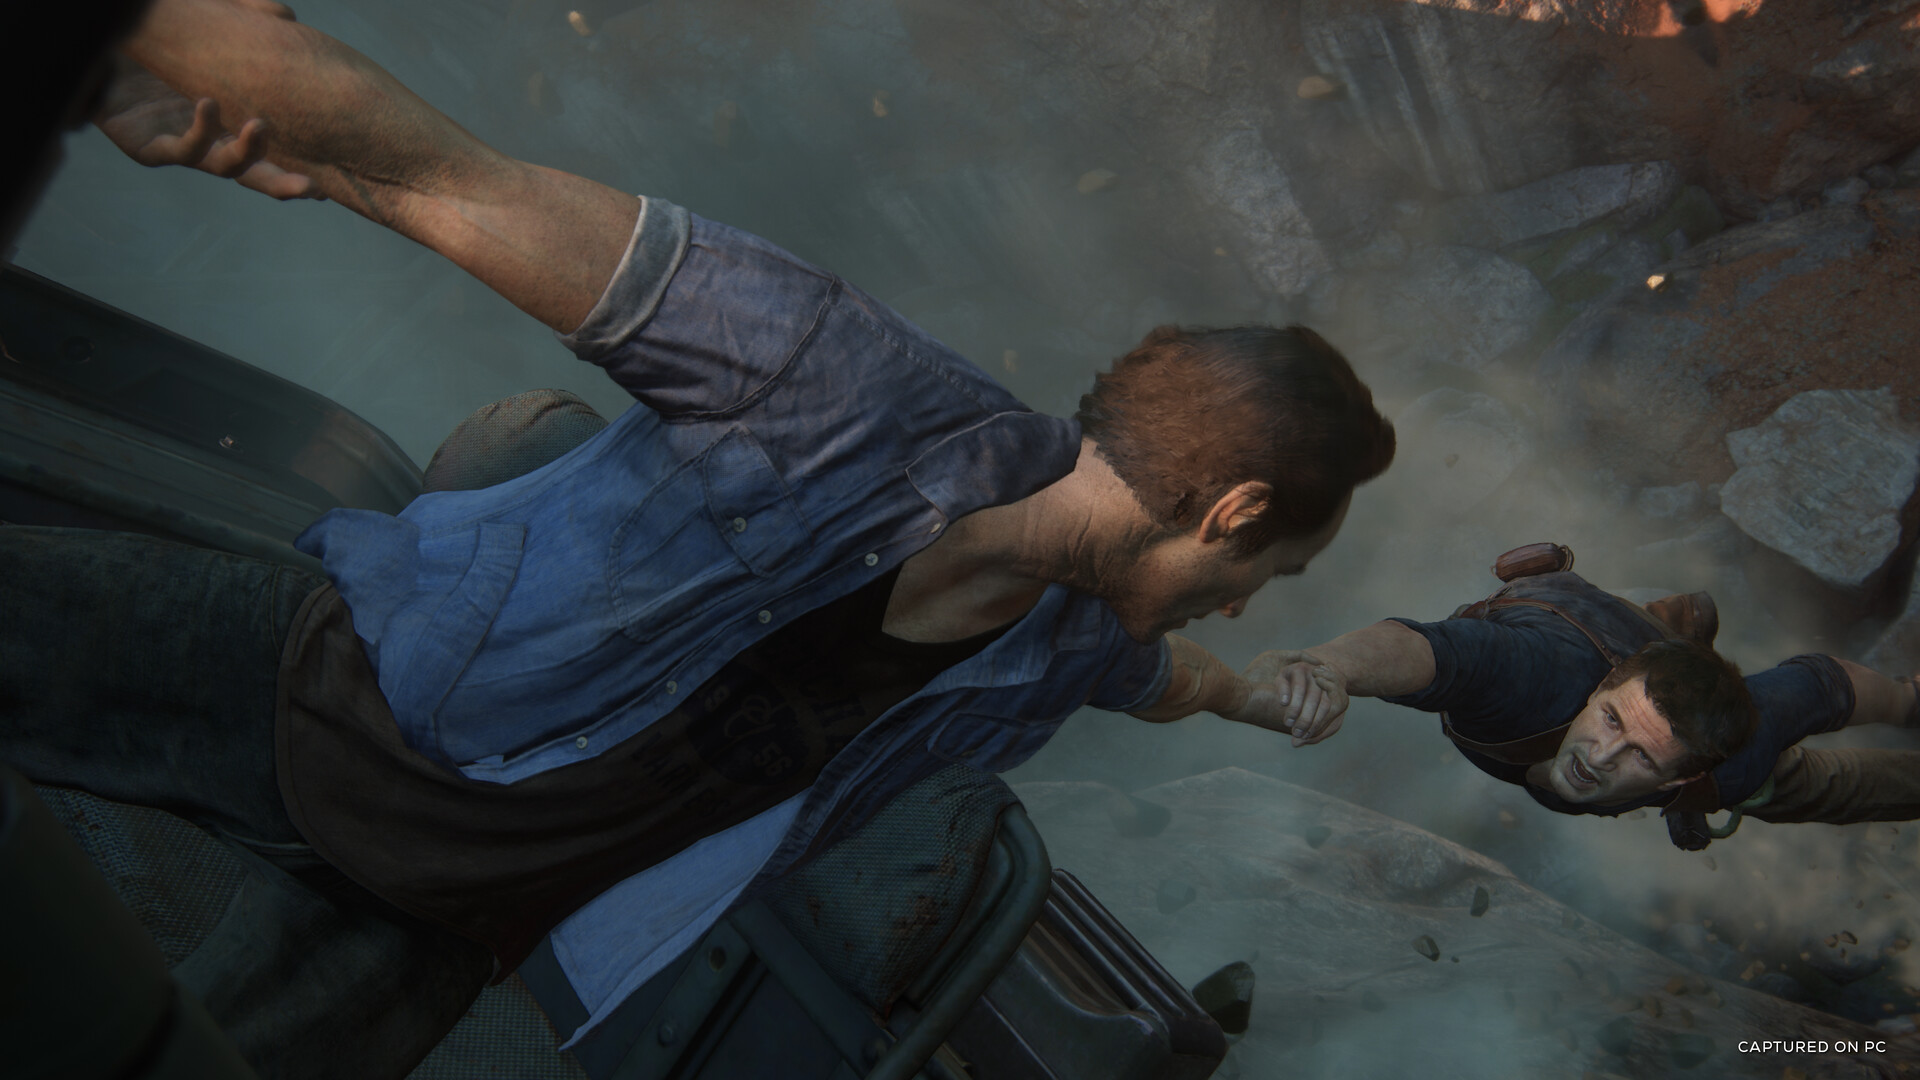 Uncharted 4 PC Download - Install Games